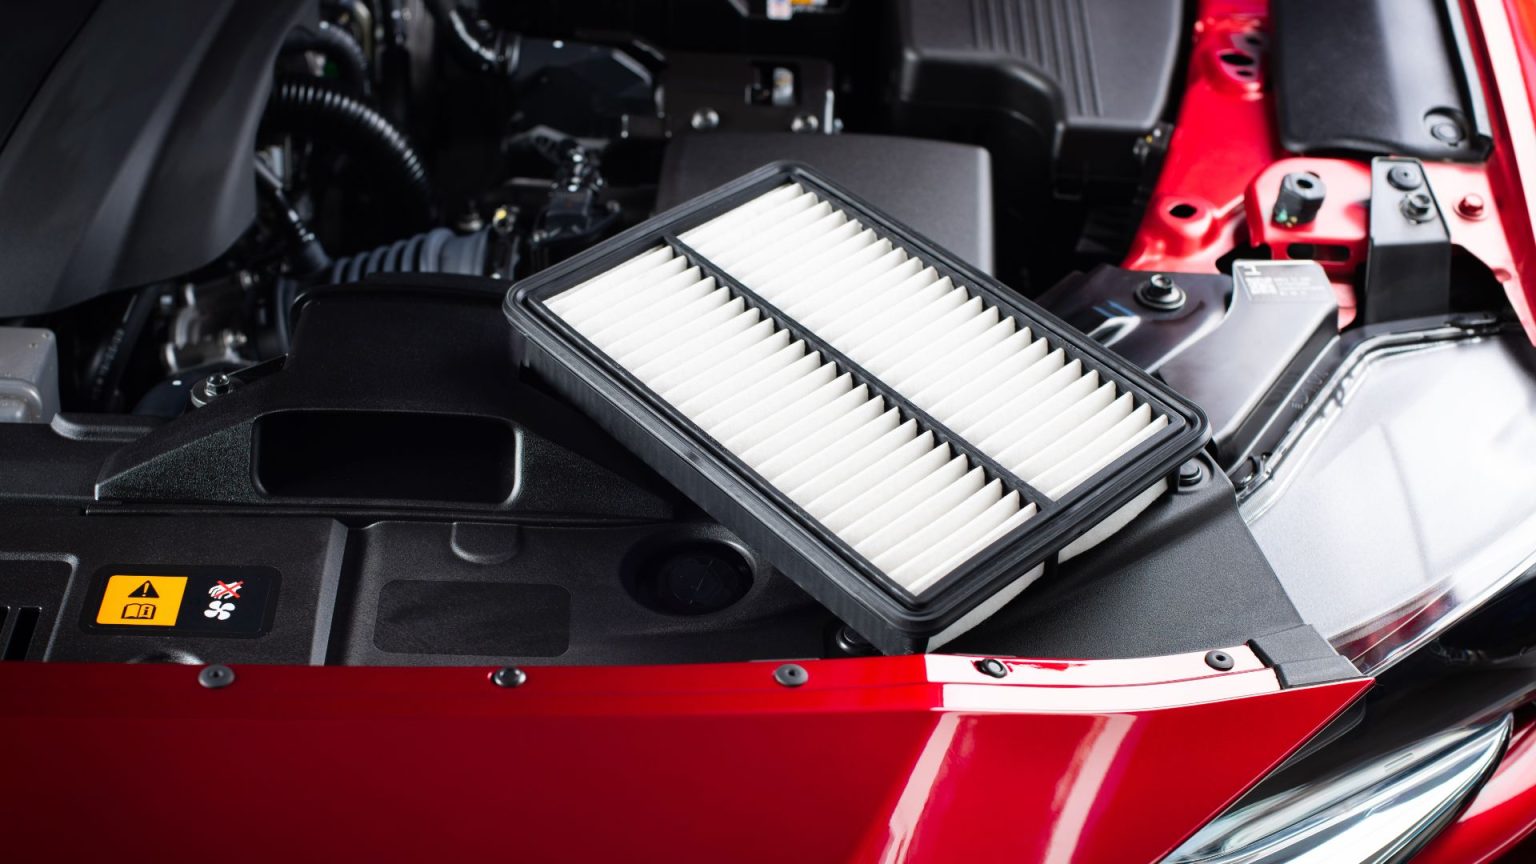 Dirty air filter symptoms — can it harm your engine? | REREV